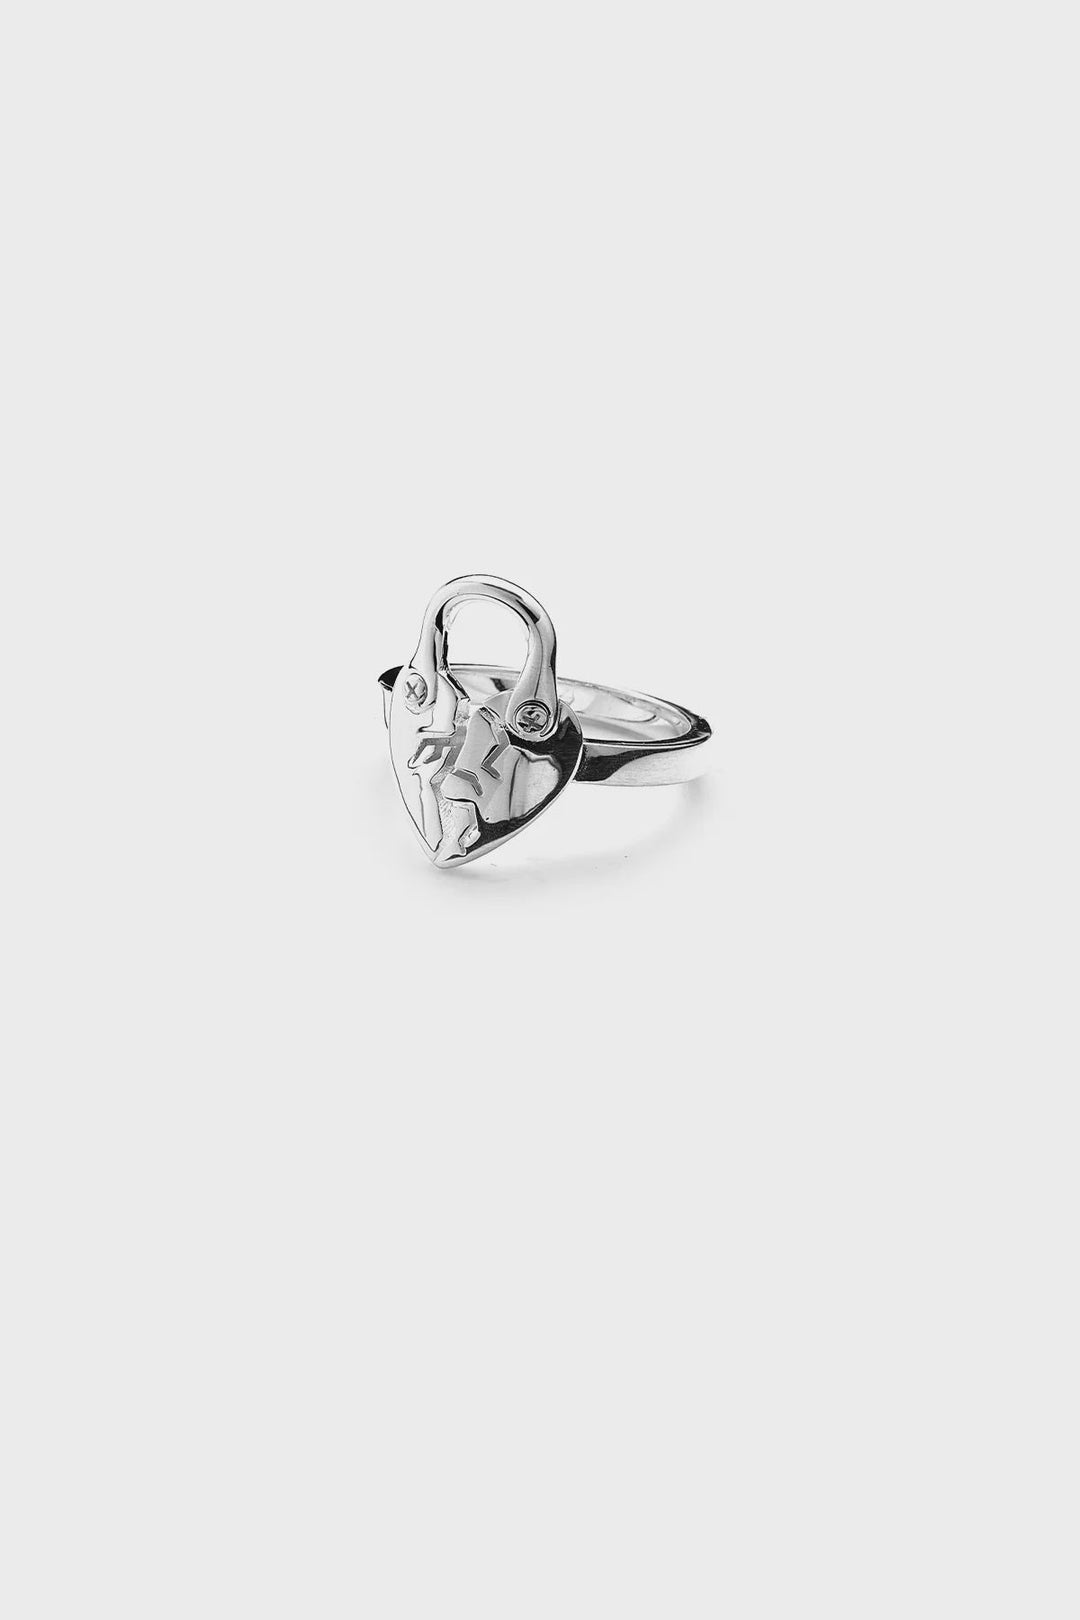 Fractured Heart Ring - Chillis & More NZ